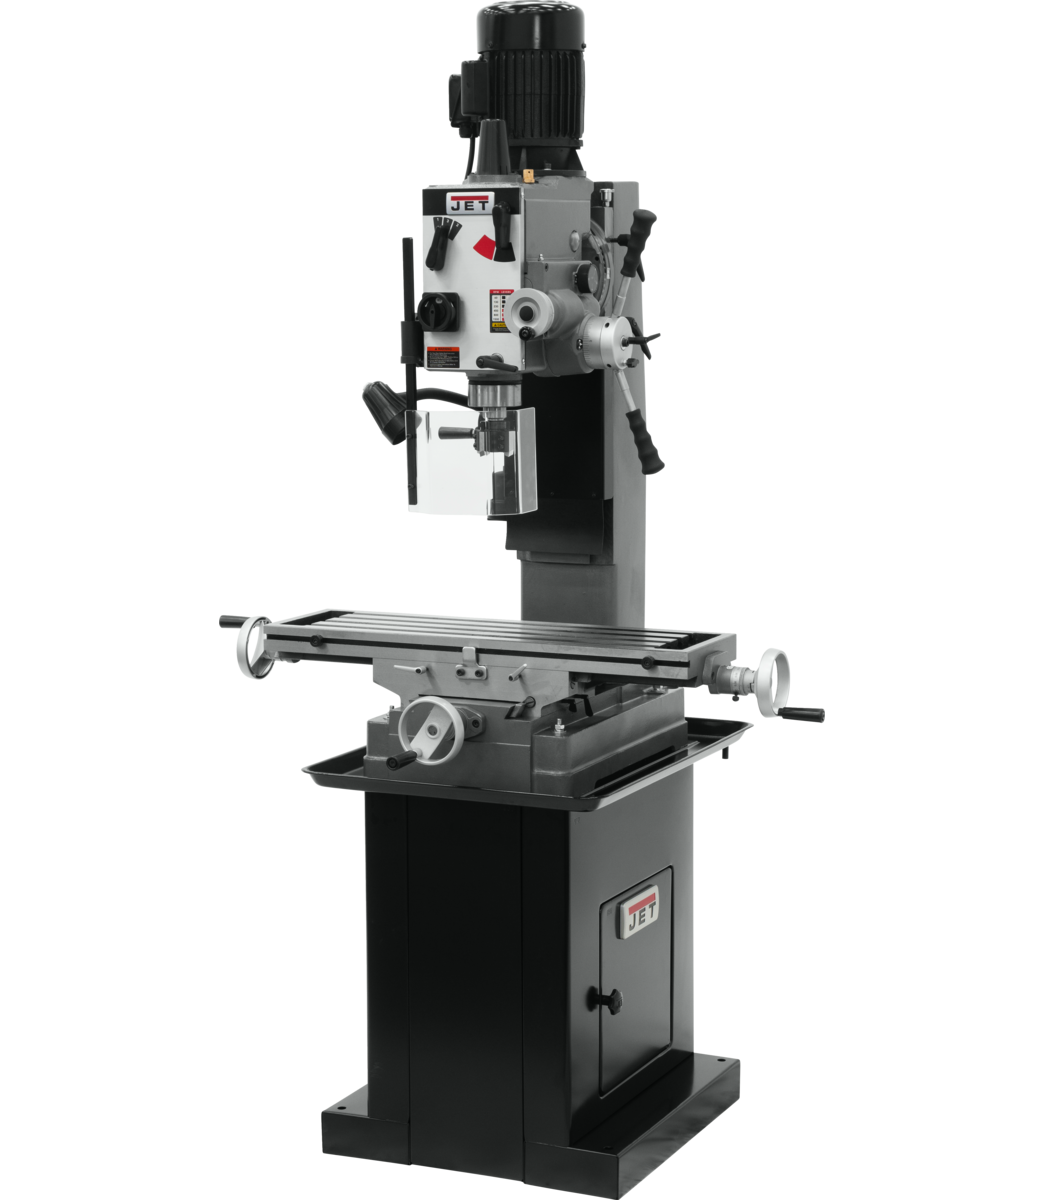 351161, JMD-45GHPF, Geared Head Square Column Mill Drill with Power Downfeed with DP500 2-Axis DRO & X-Axis Powerfeed